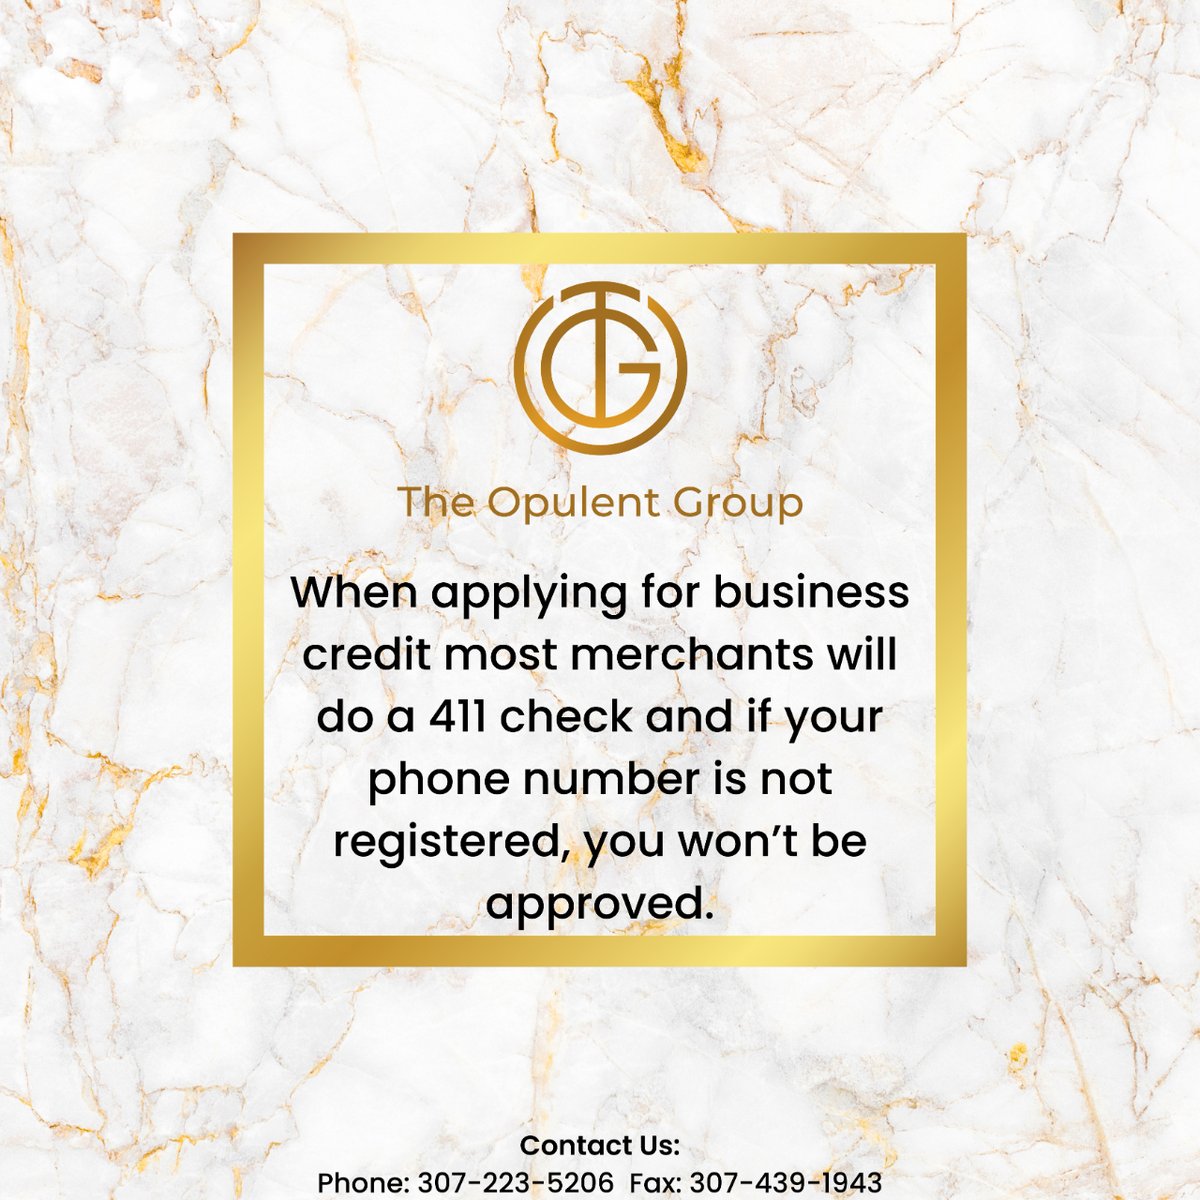 Worried about business credit? The Opulent Group has your back! 

#financialliteracy #mortgage #funding #businessowner #crediteducation #realtor #experian #personalcredit #smallbusiness #fixyourcredit #loans #finance #creditispower #studentloans #creditrepairspecialist #equifax